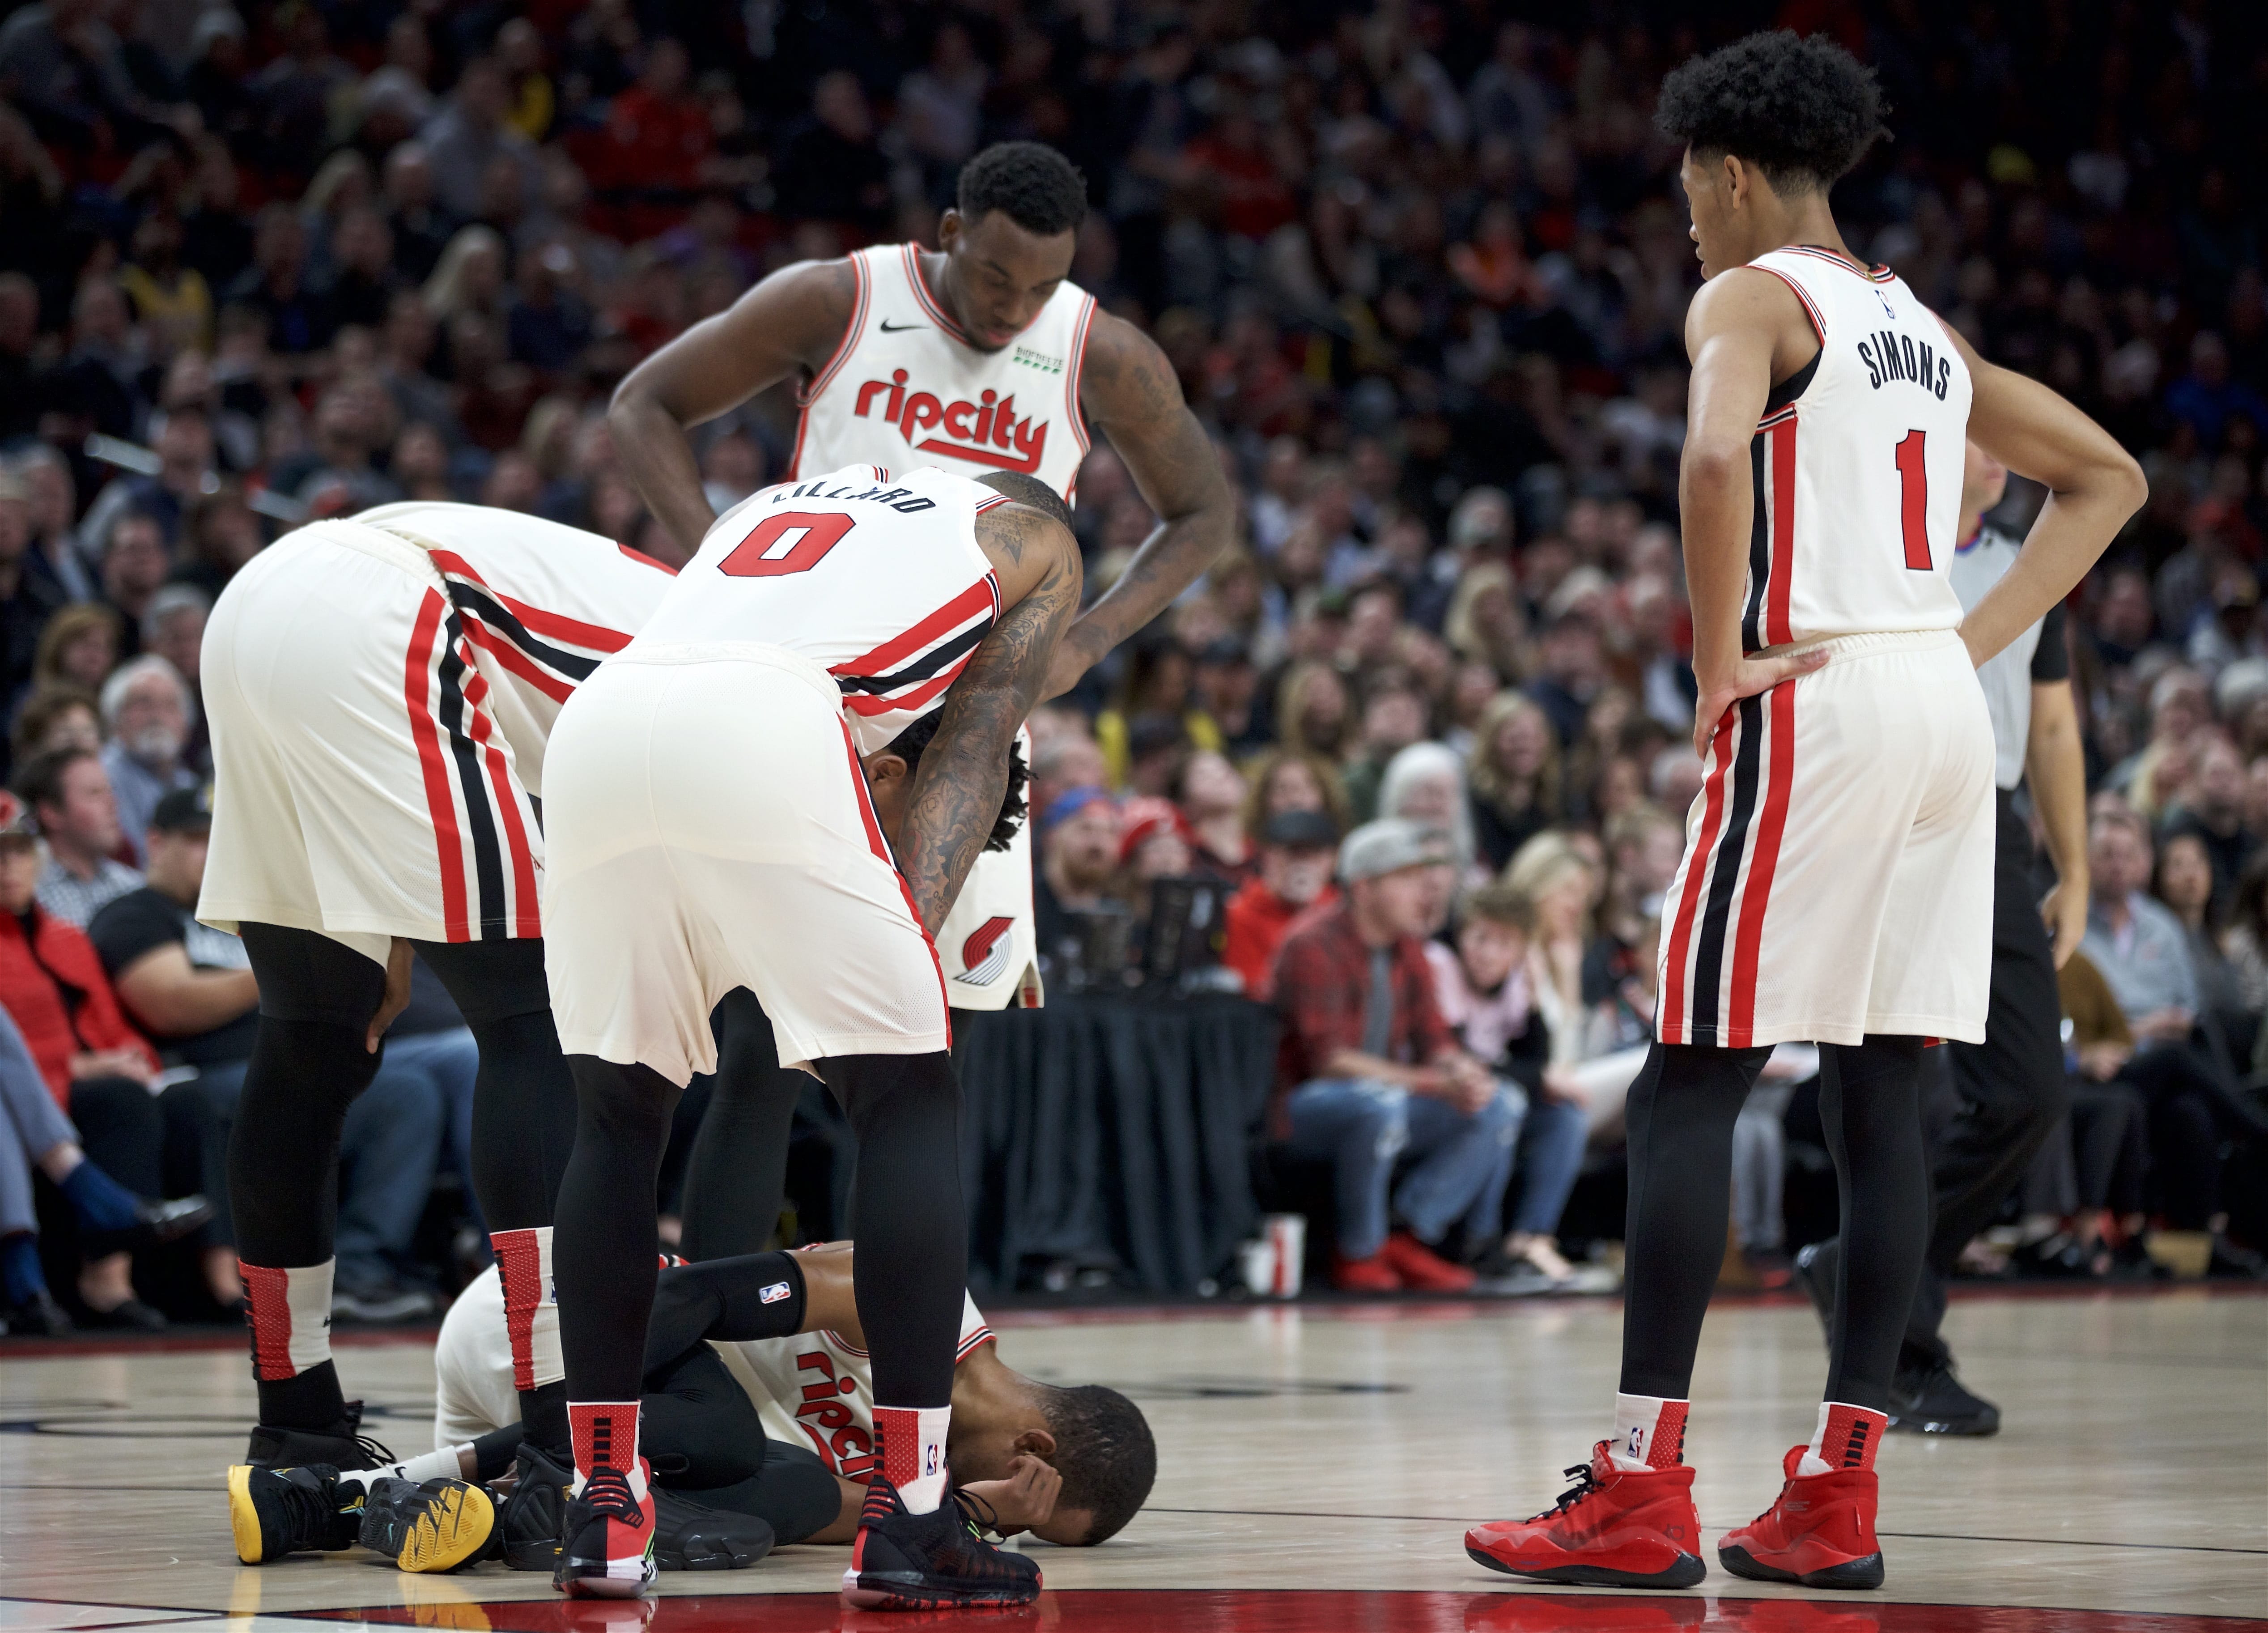 Portland Trail Blazers guard Rodney Hood is surrounded by teammates after tearing his Achilles tendon during the first half of the team's NBA basketball game against the Los Angeles Lakers in Portland, Ore., Friday, Dec. 6, 2019.